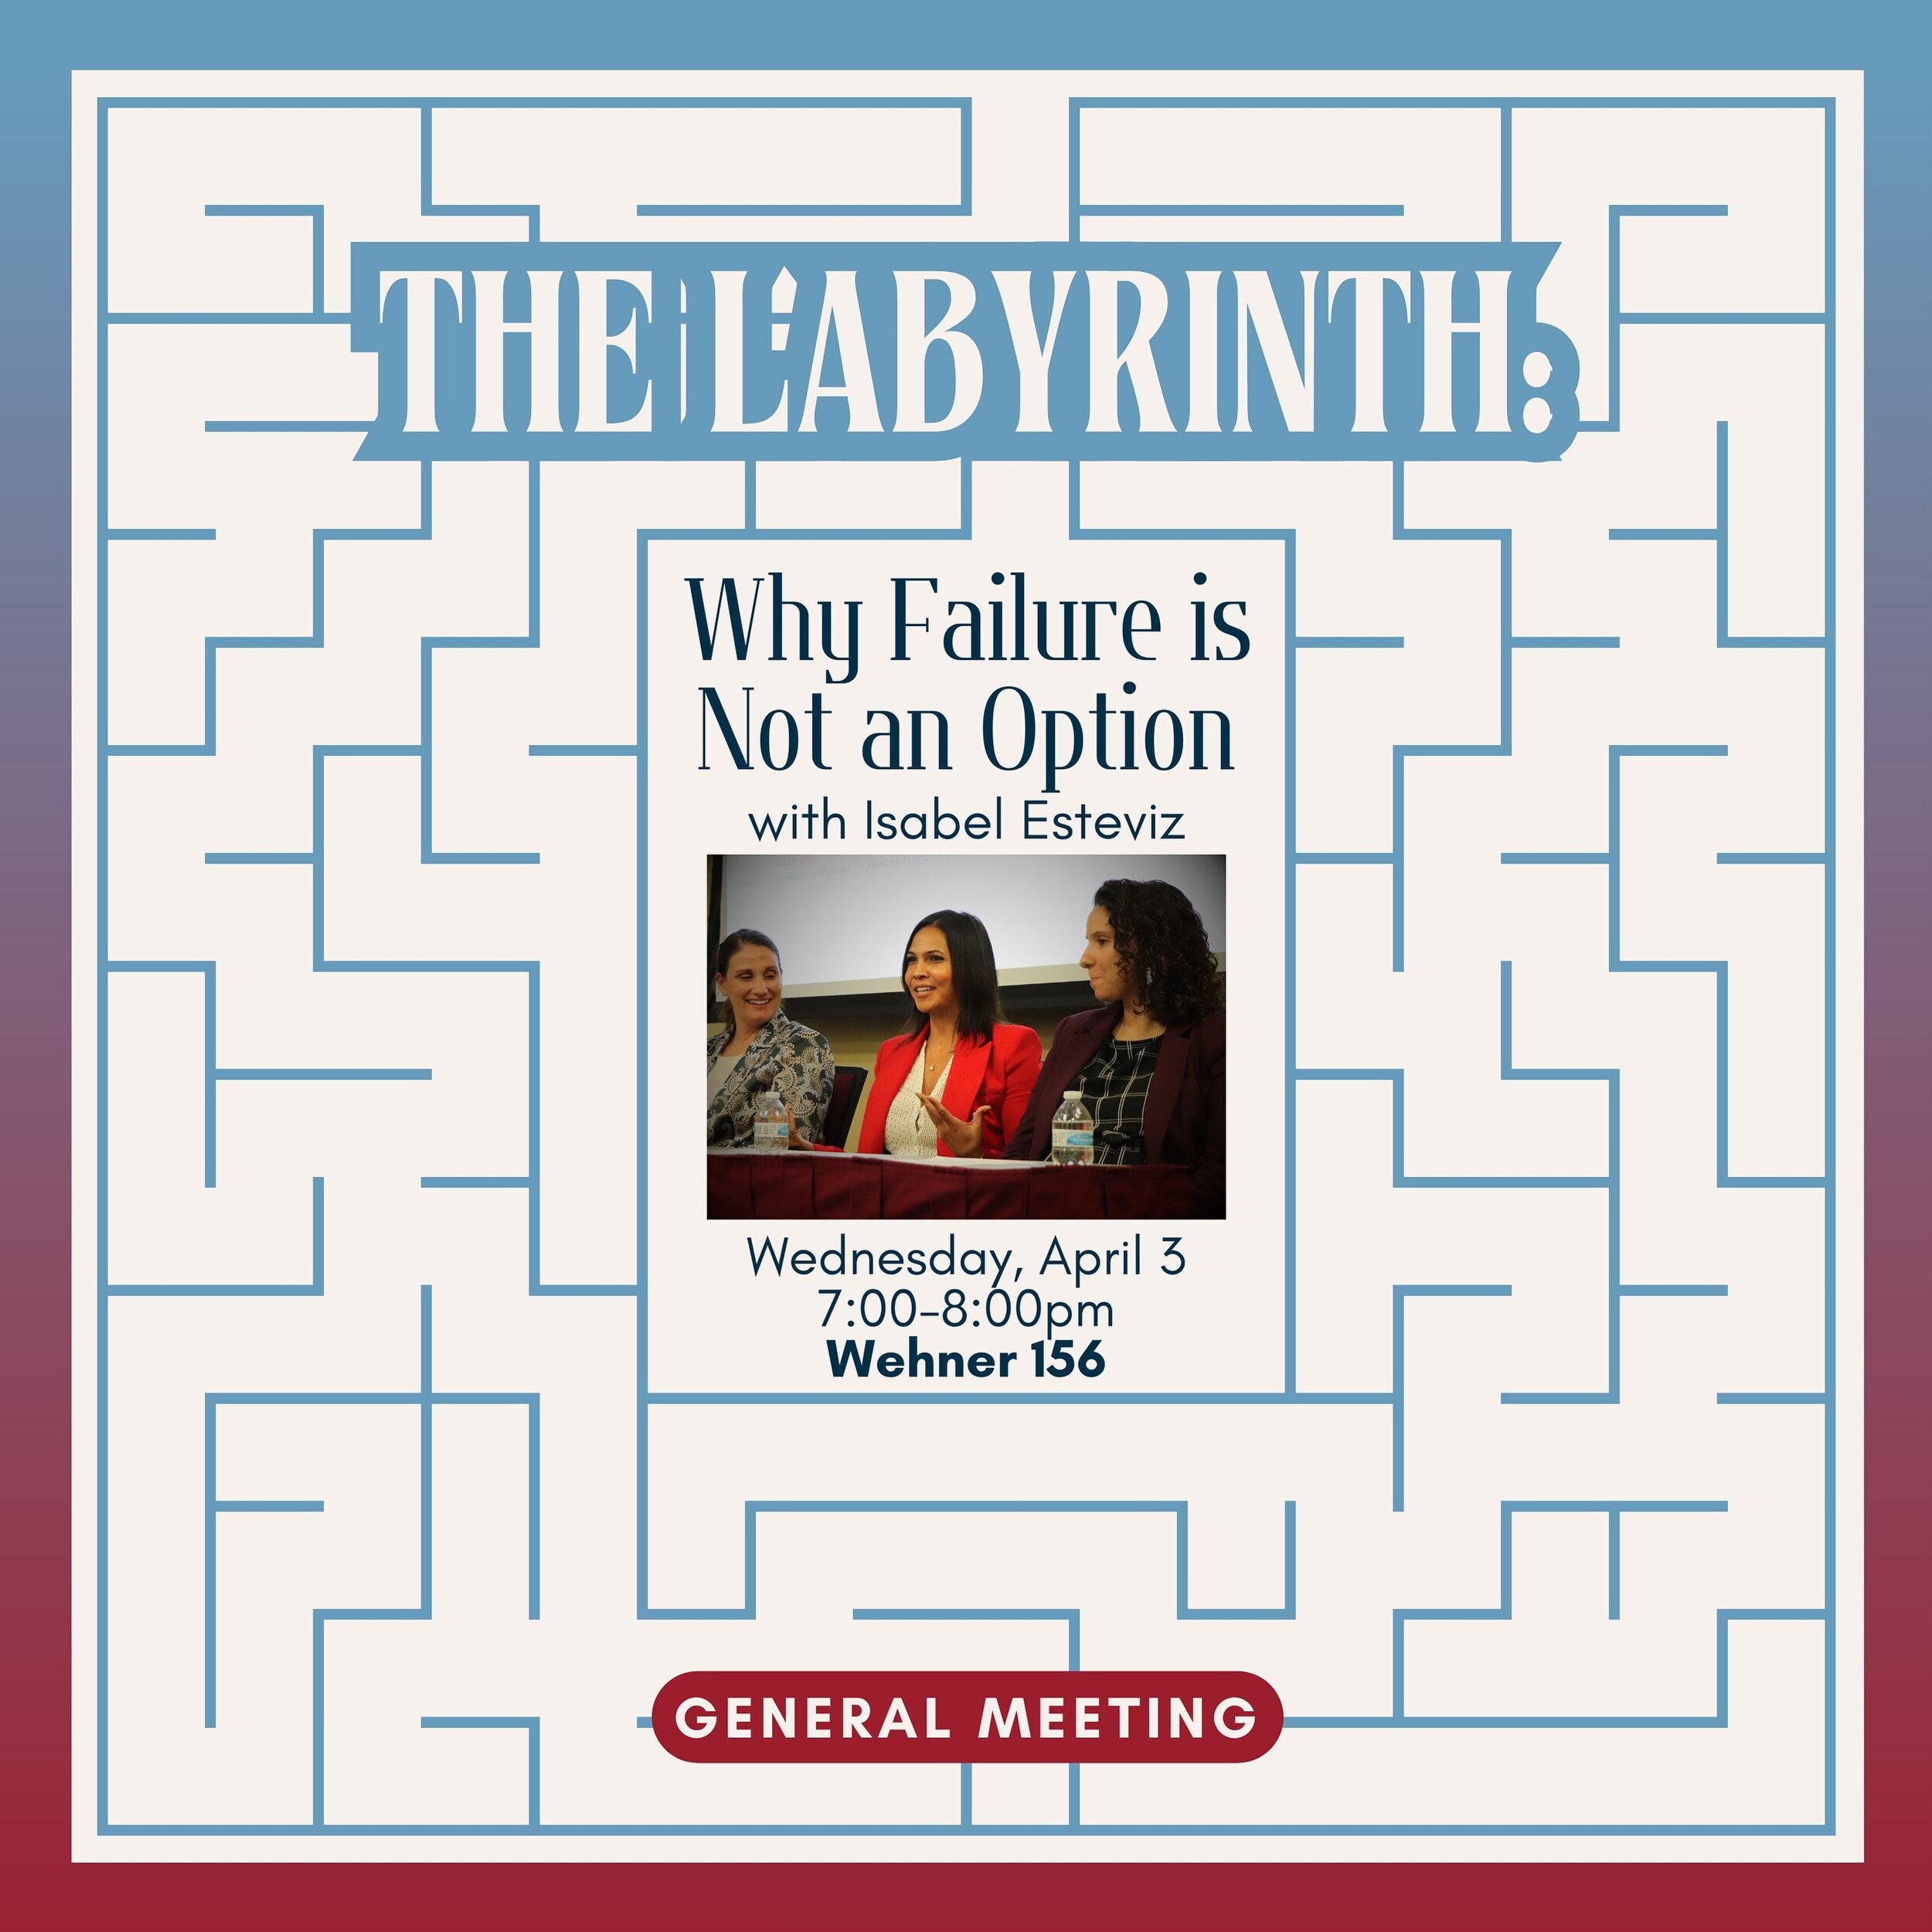 Howdy! 👋 We have an exciting general meeting coming up on Wednesday! 🤩 Join us to hear from Isabel Esteviz as she presents The Labyrinth: Why Failure is Not an Option 💡🧩🎯💫

Food will be provided. See you all there! 🙌